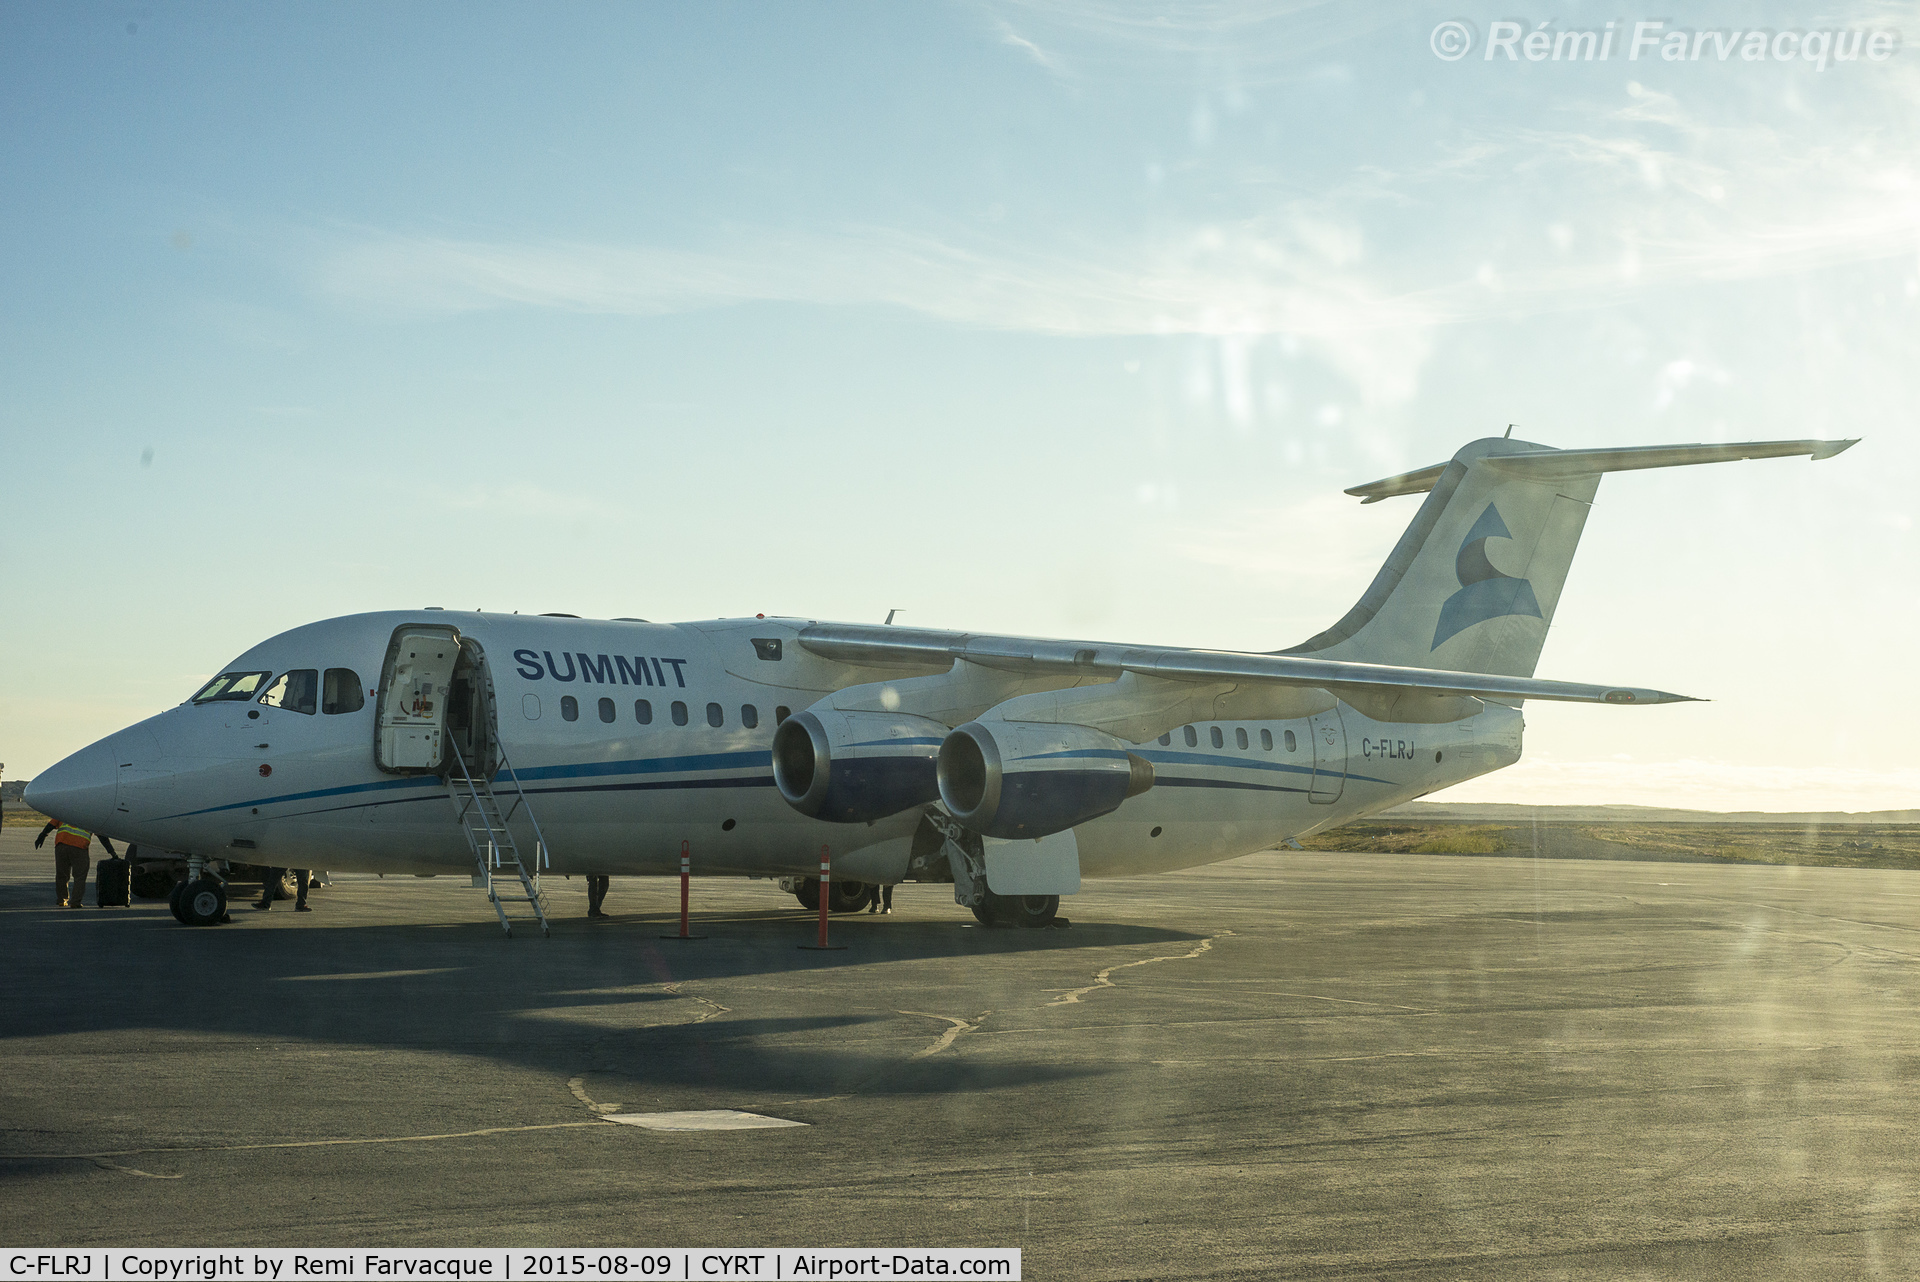 C-FLRJ, 1997 British Aerospace Avro RJ85 C/N 2302, About to board on the flight Rankin Inlet to Yellowknife, 1935h.